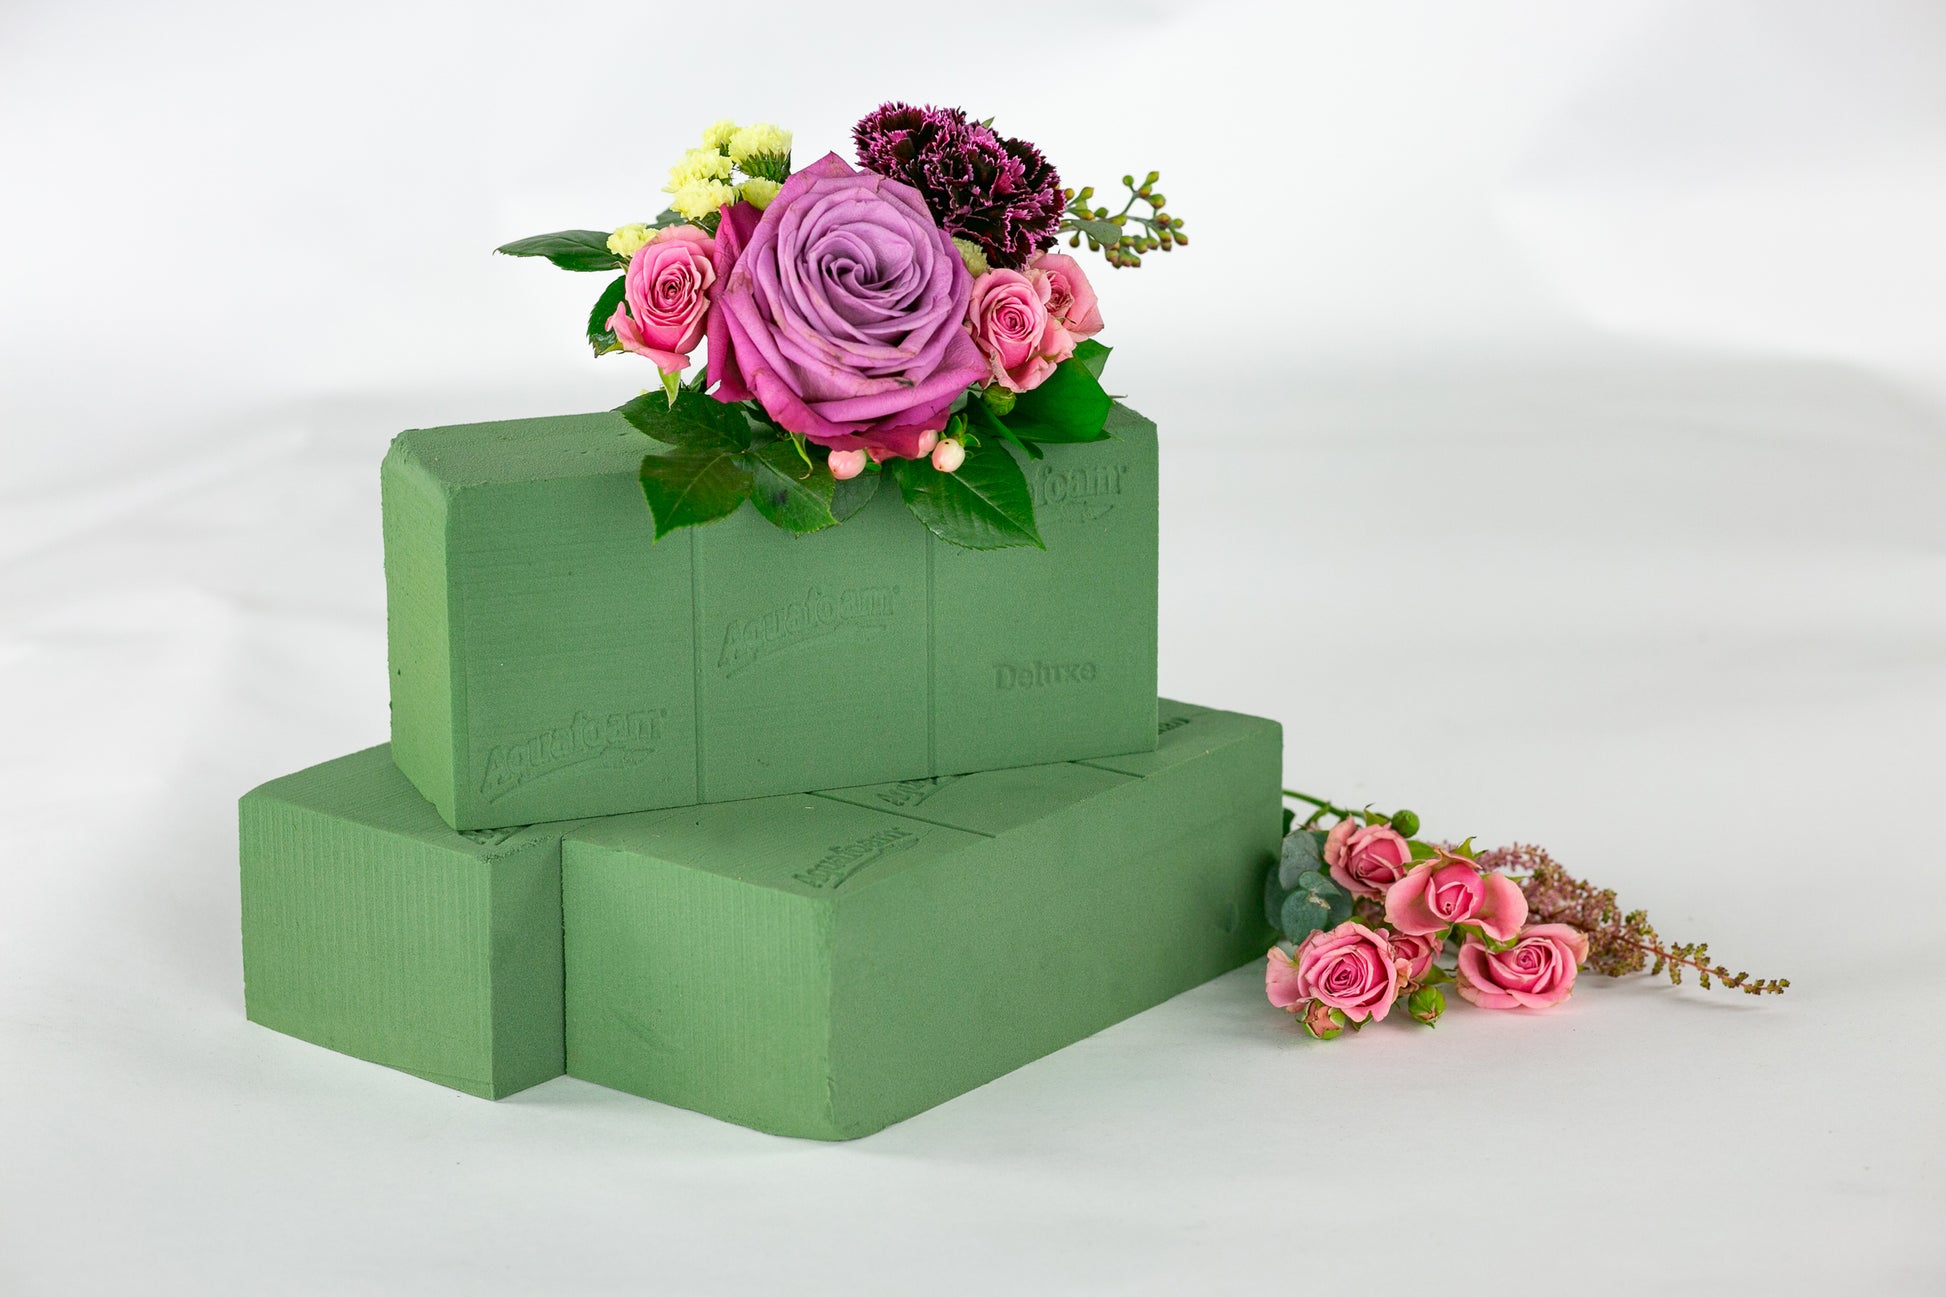 Smithers Oasis Floral Products Floral Foam Brick, 2 Pack